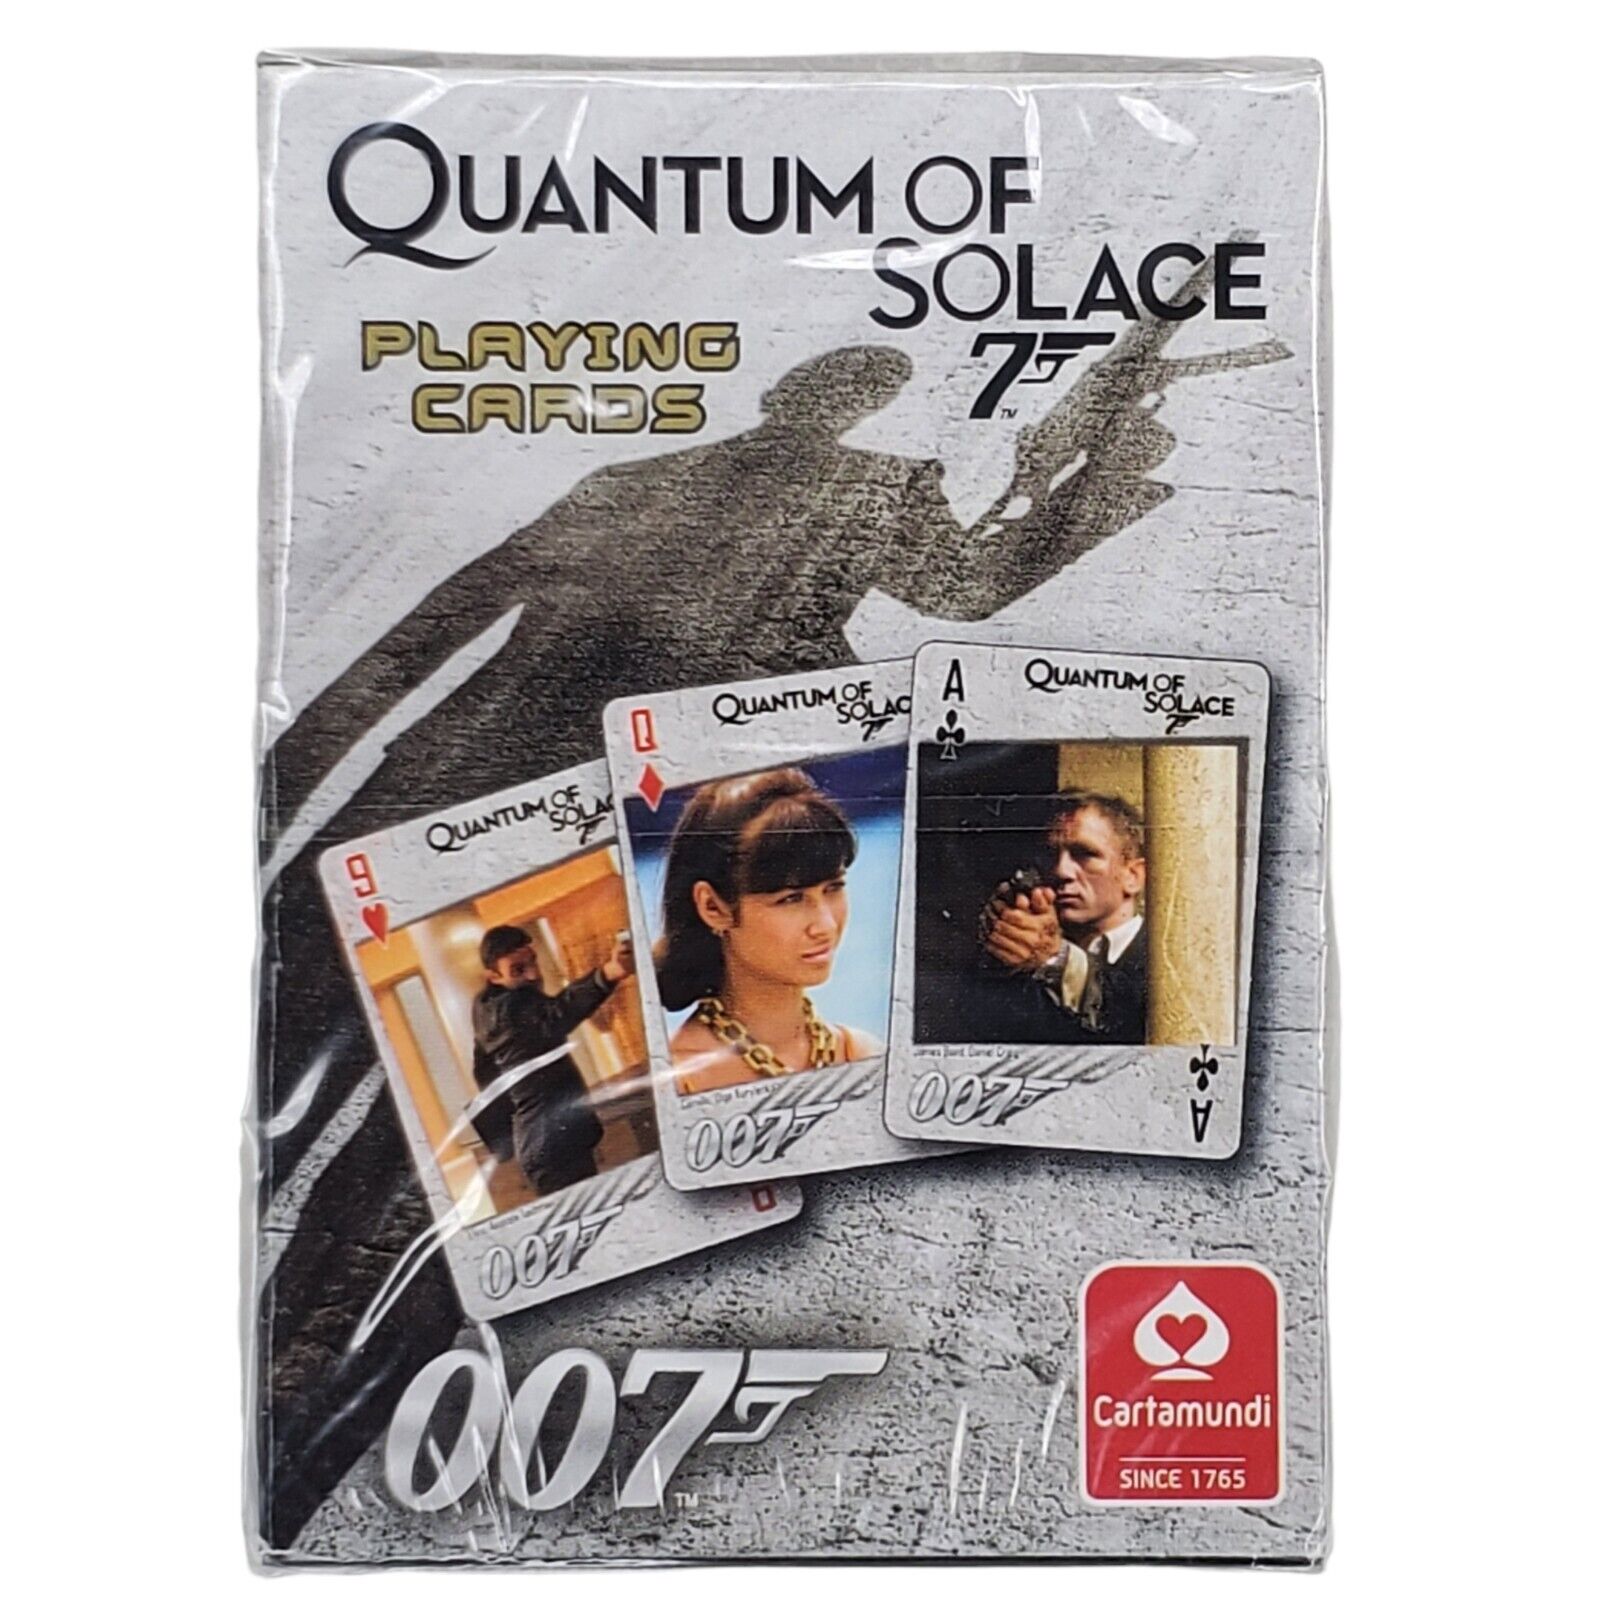 VTG 007 Quantum Of Solace Playing Cards Cartamundi Sealed Deck Made In USA